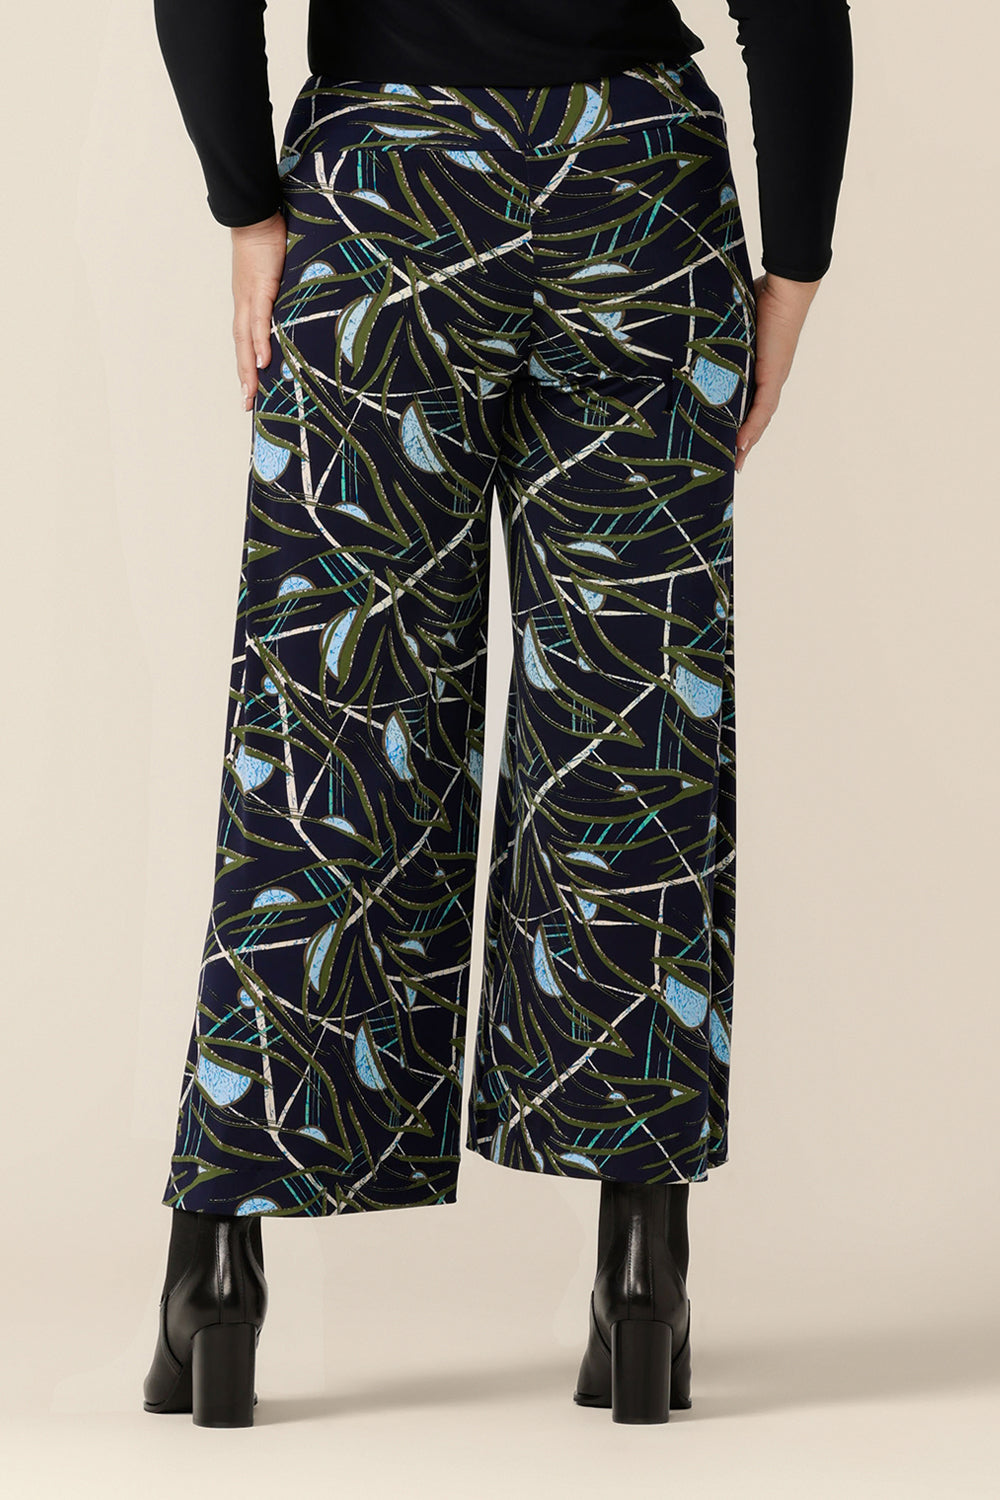 Back view of Australian-made, wide-leg pants by Australian and New Zealand women's clothing label, L&F. Featuring a blue, green and white abstract print on navy-base jersey, these stretch-fit wide leg trousers wear well for workwear or casual wear.